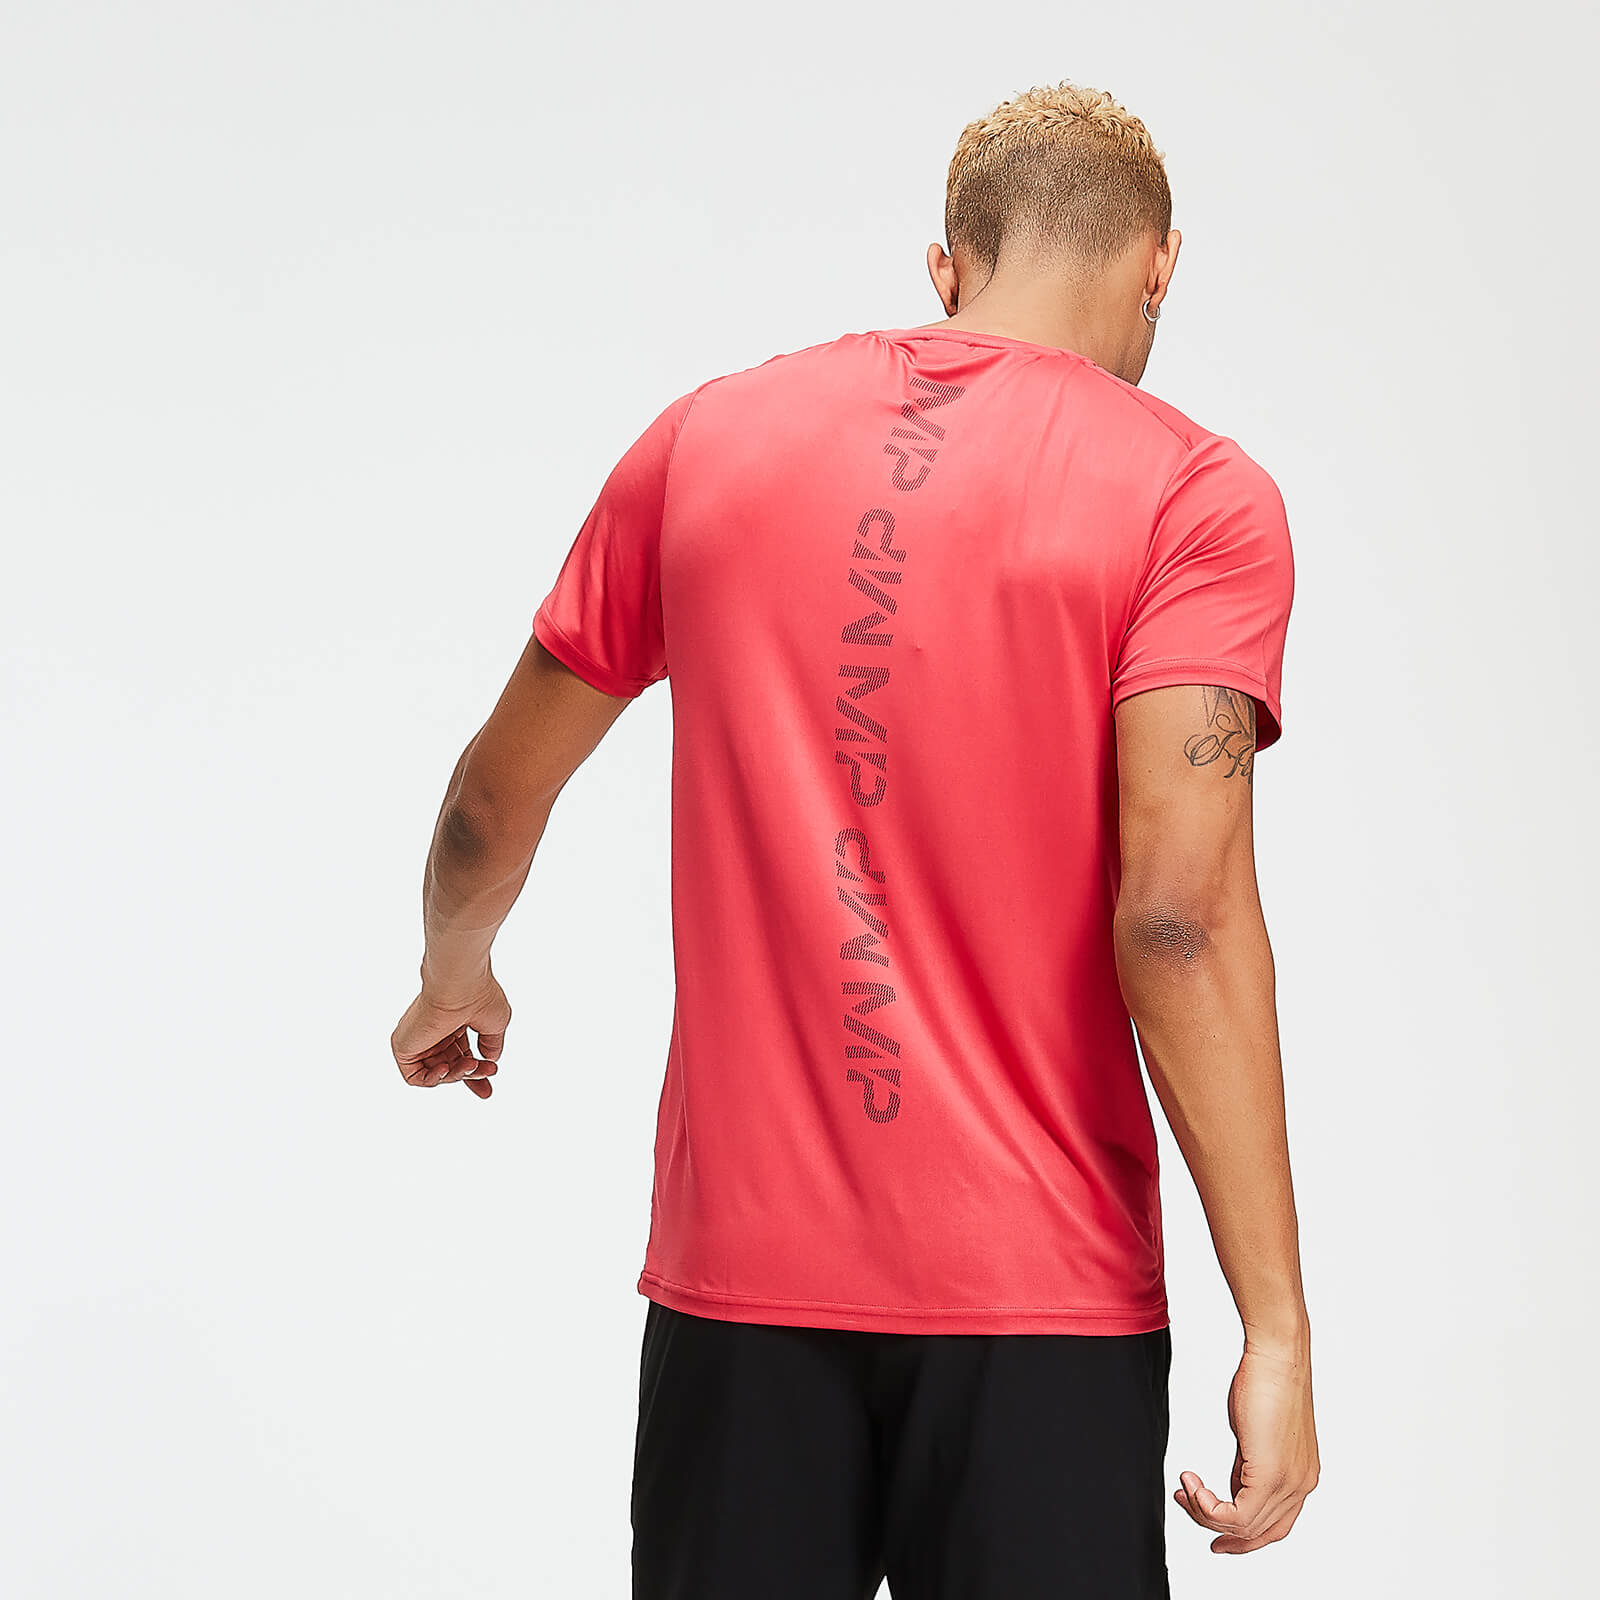 Myprotein Training T-Shirt - Washed Red - M